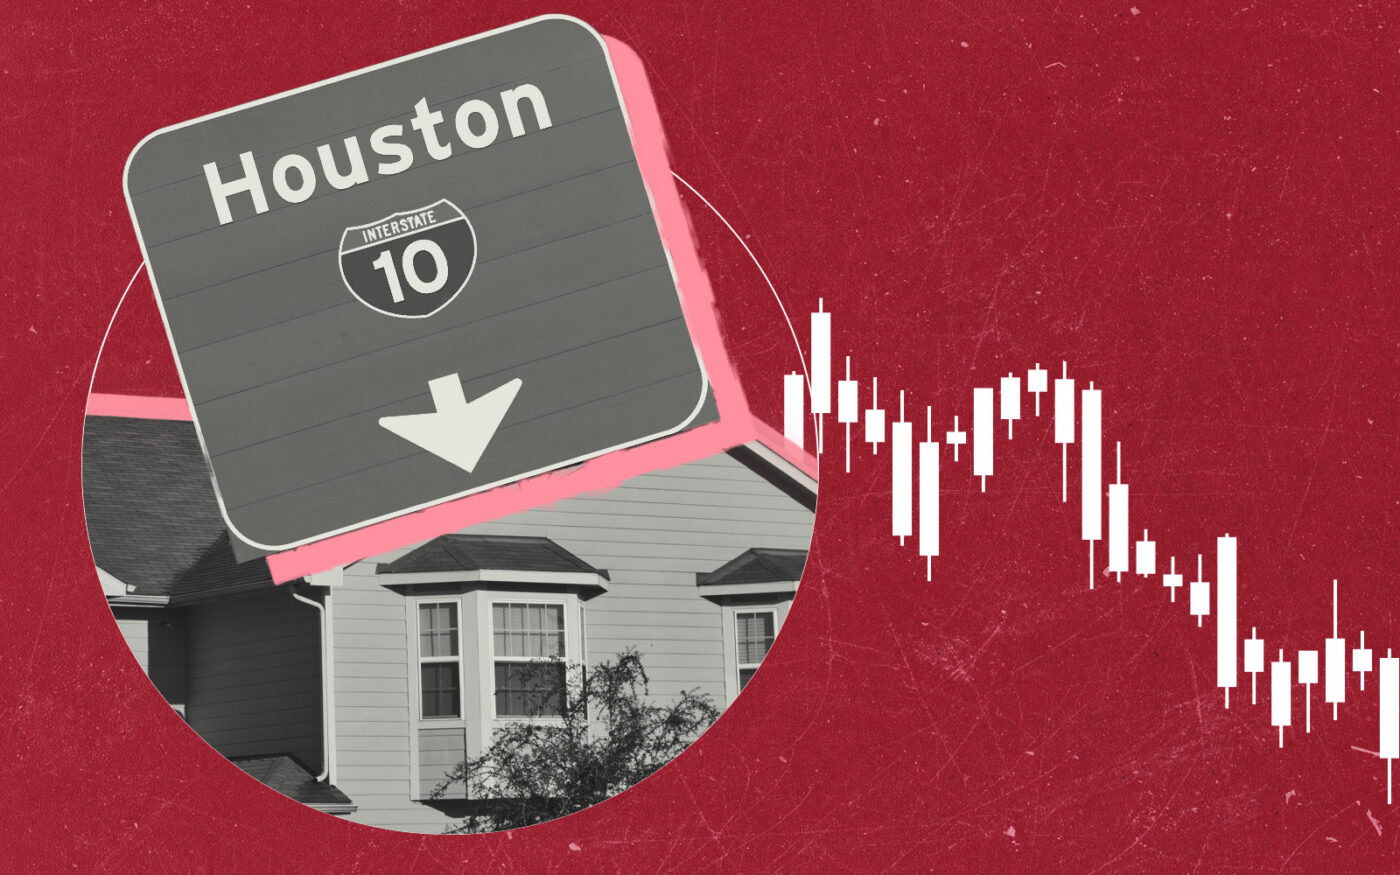 Houston Housing Market Declines for Second Consecutive Year